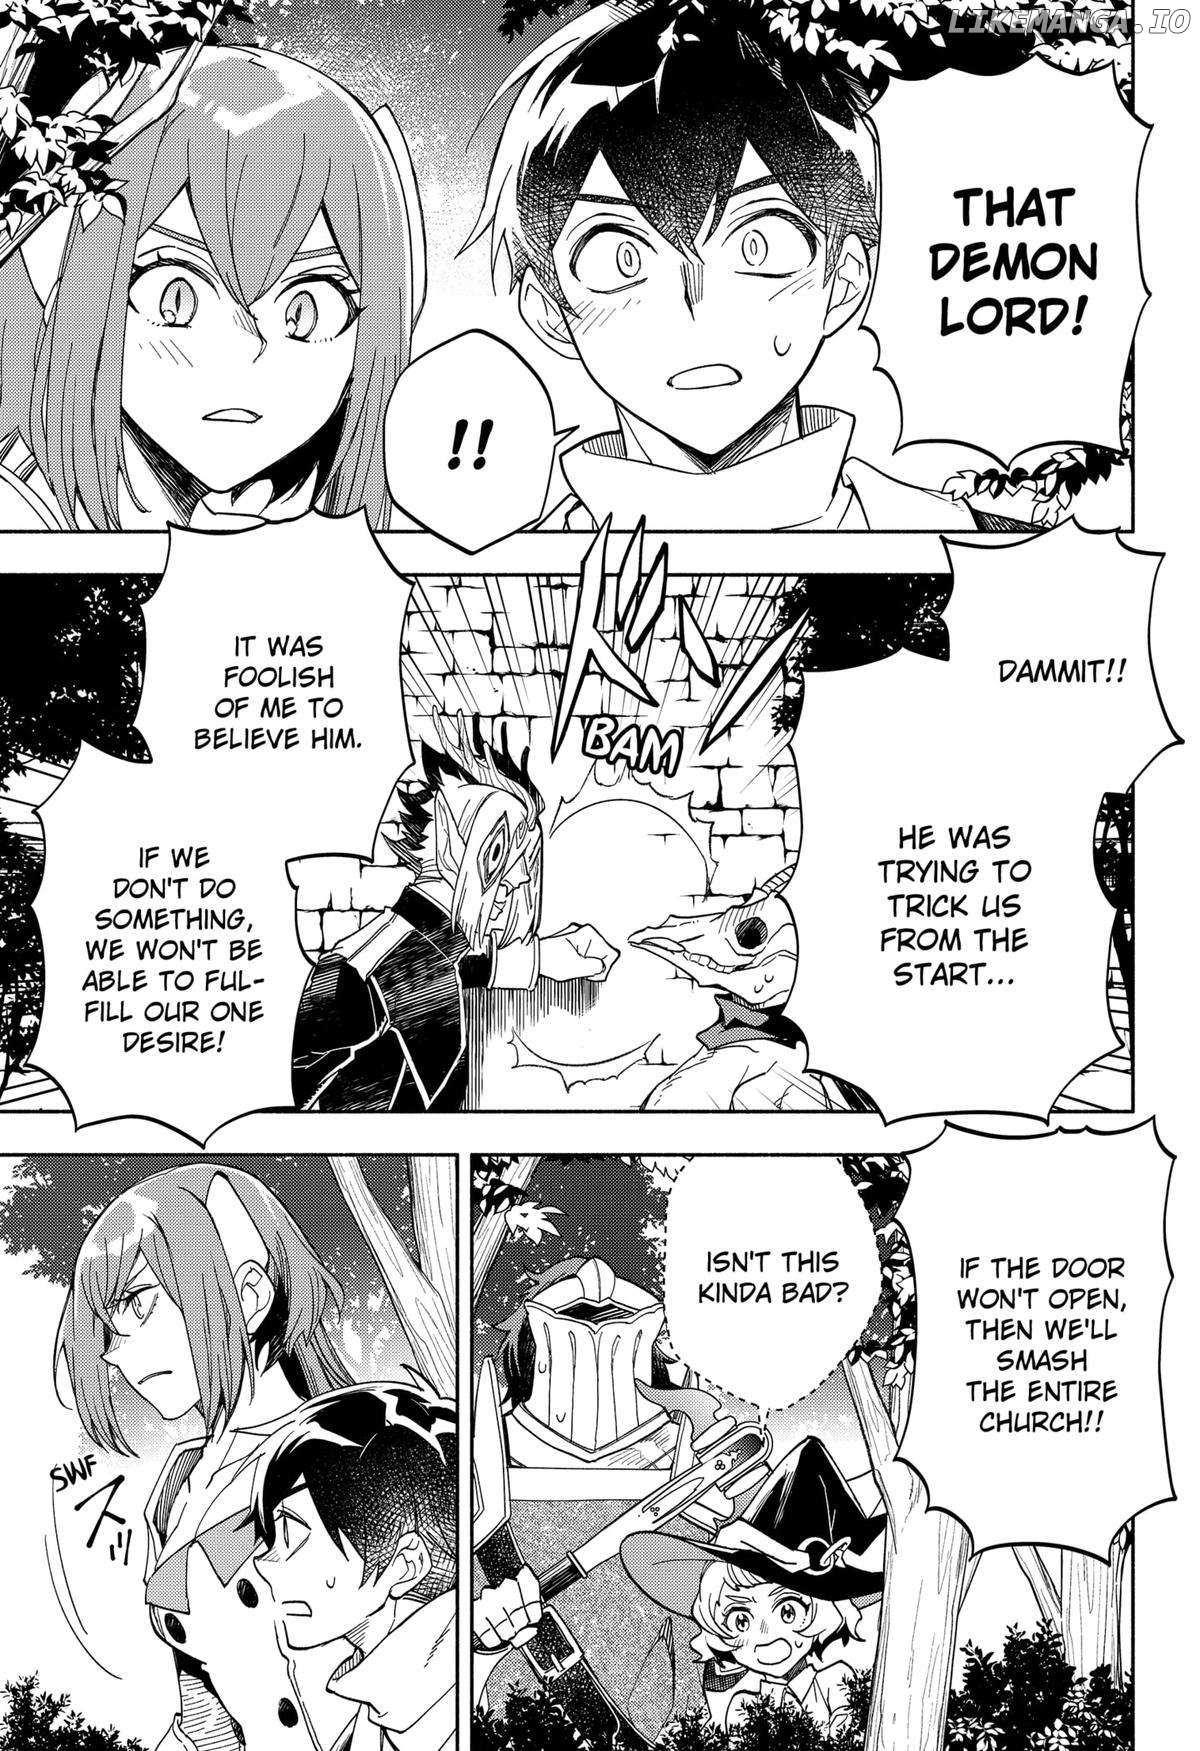 Demon Lord Exchange!! - 16 page 10-27960ba5